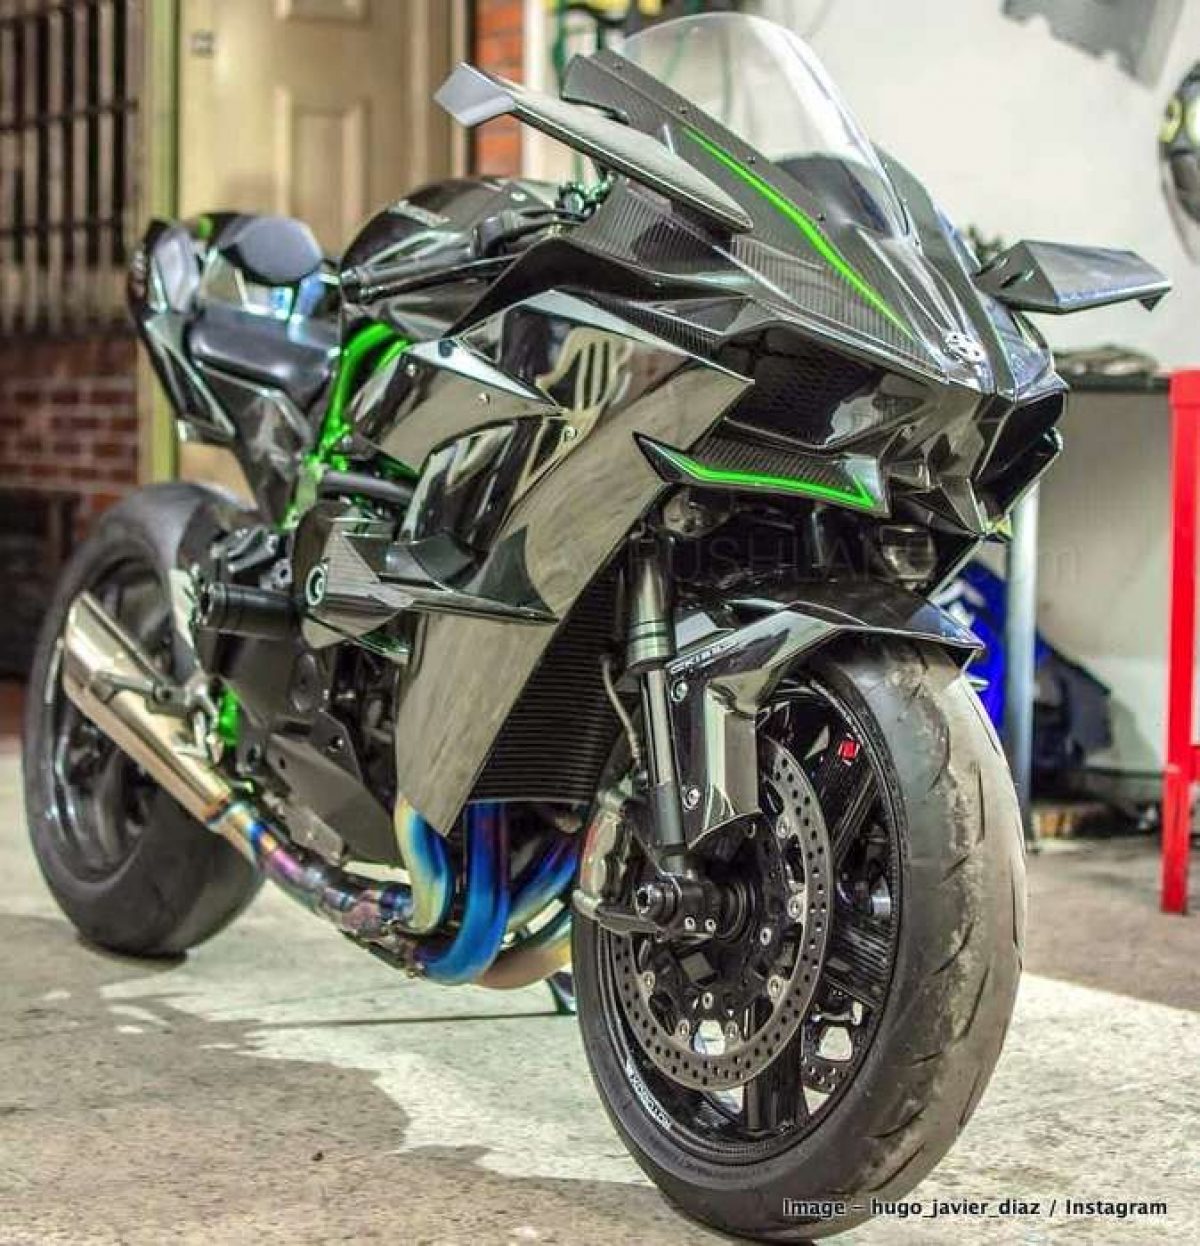 civilisere nummer Jeg klager 2019 Kawasaki Ninja H2R worth Rs 72 L - 1st and only delivery in India